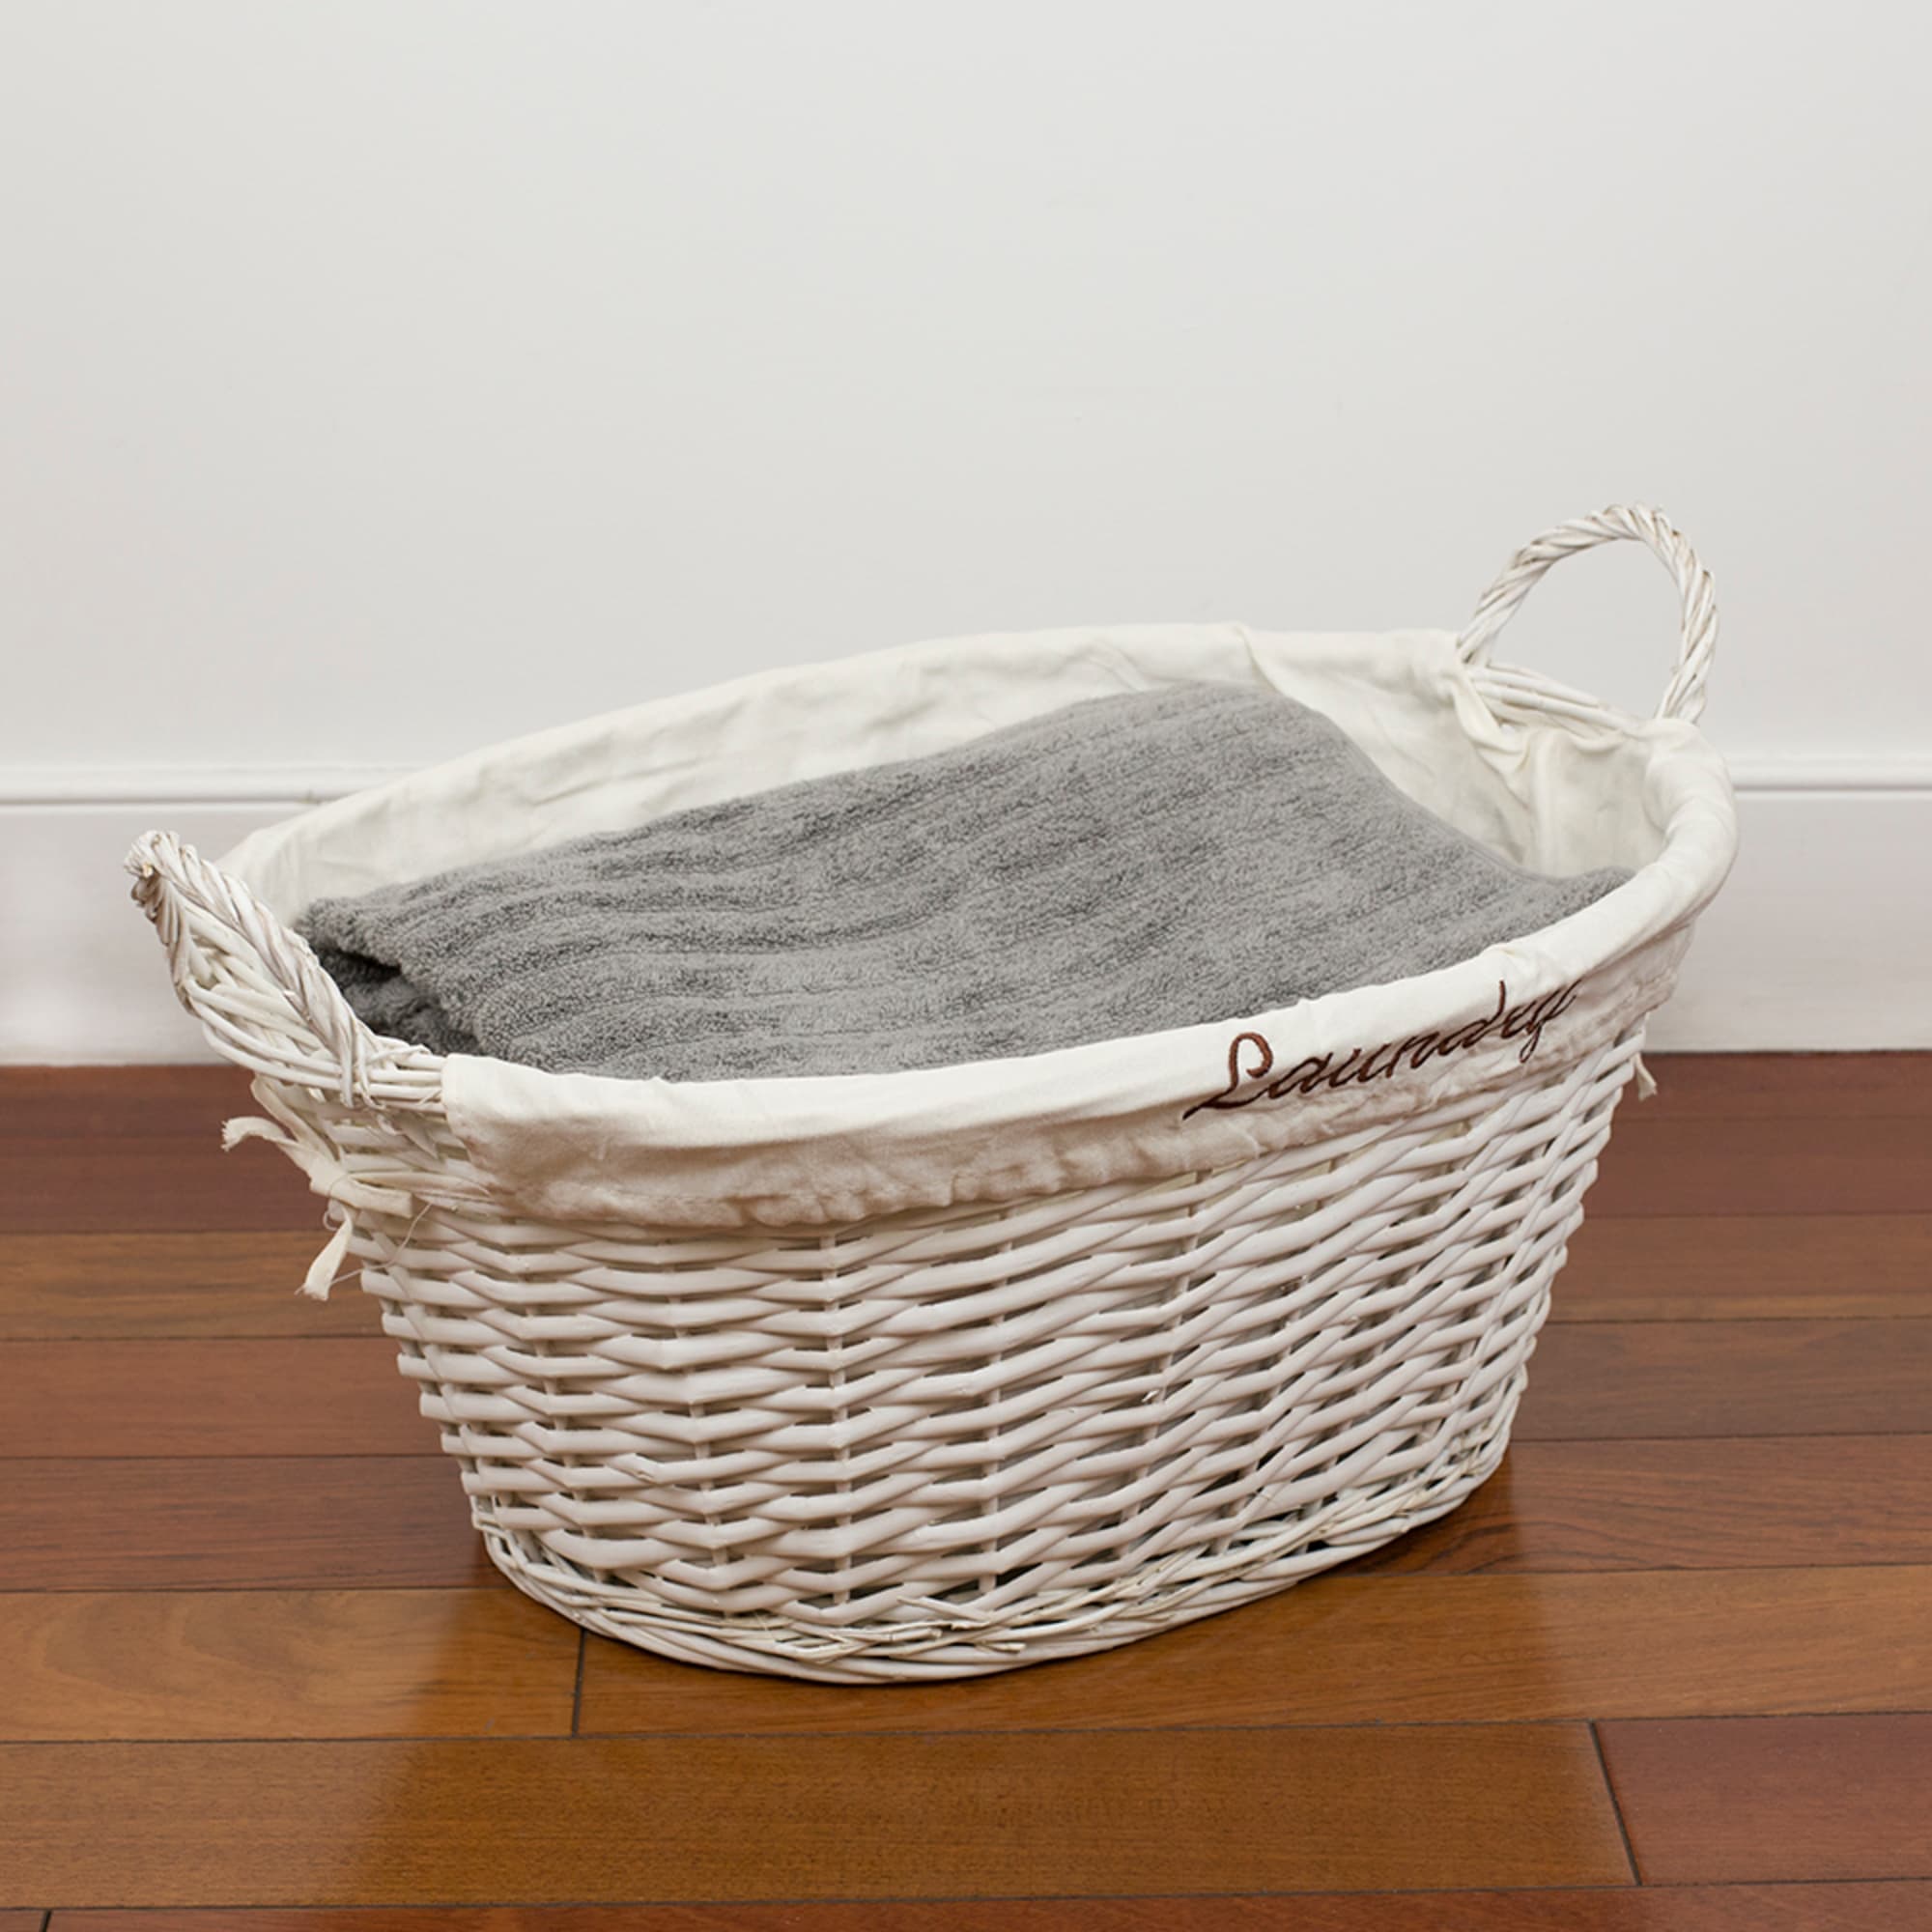 Home Basics Laundry Wicker Basket with Removable Liner, White $10.00 EACH, CASE PACK OF 6